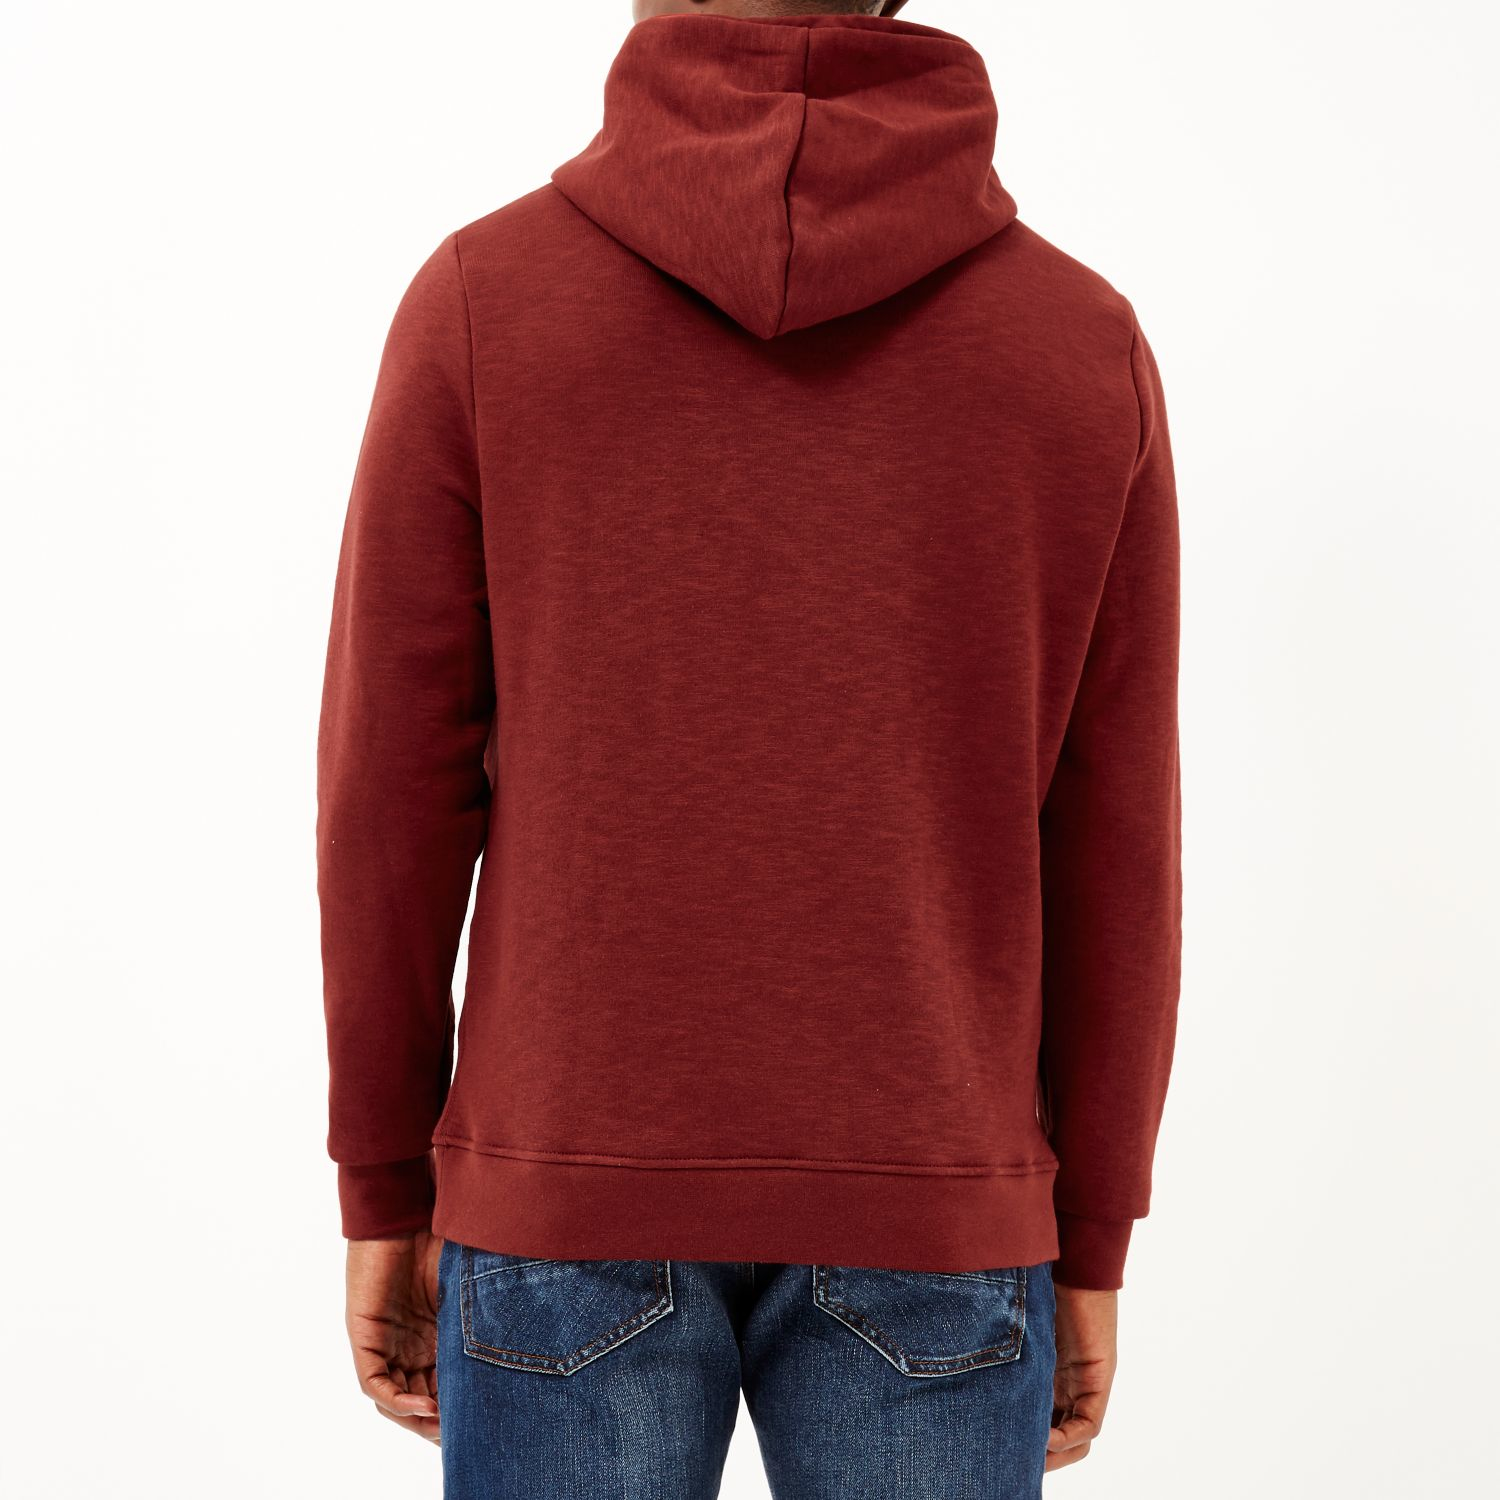 River Island Red Cross Neck Hoodie in Red for Men - Lyst